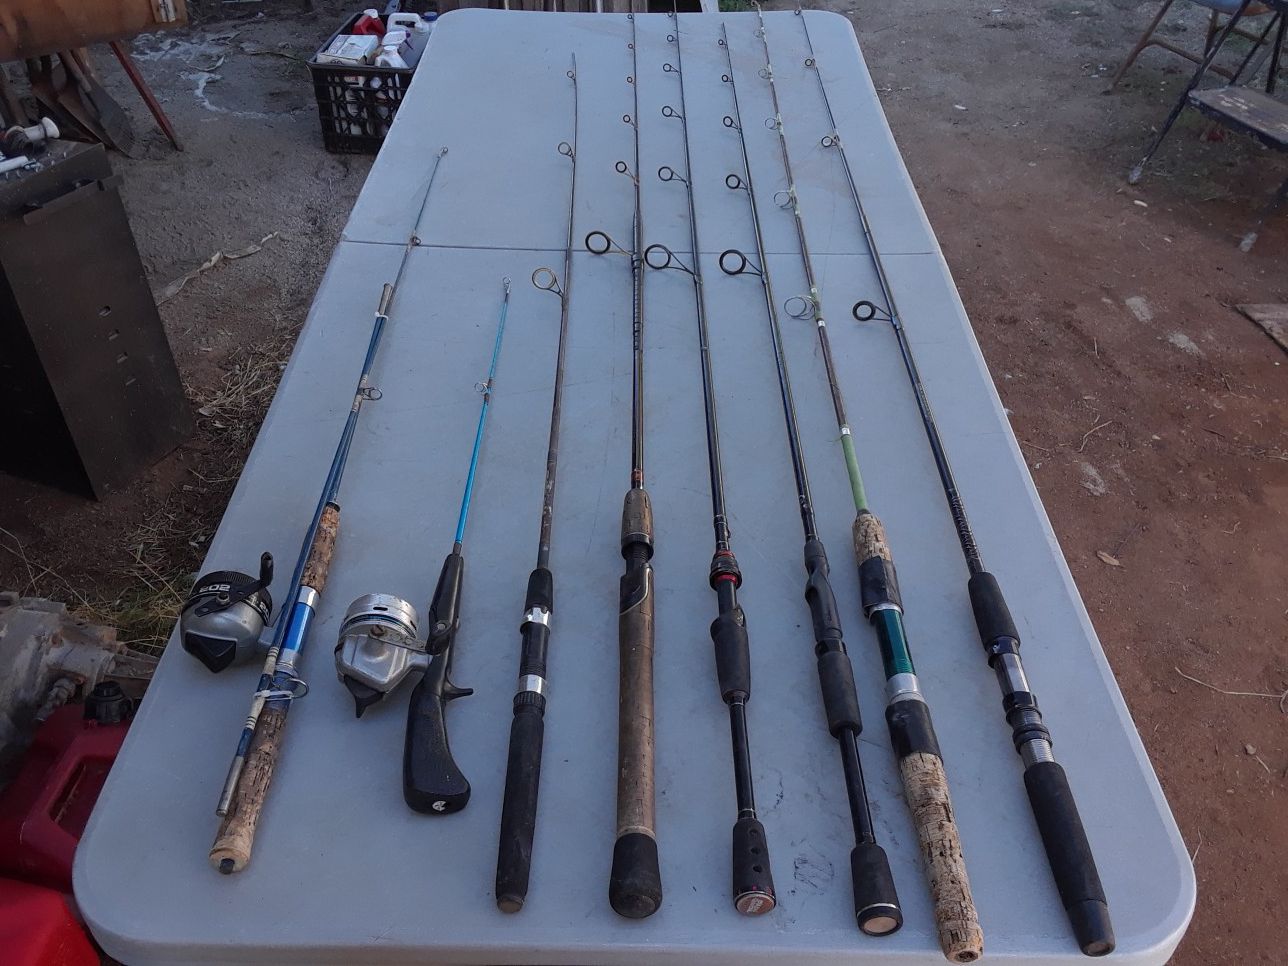 Assorted fishing poles for sale some with reels some have tip damage Garcia Shimano Daiwa $7 each